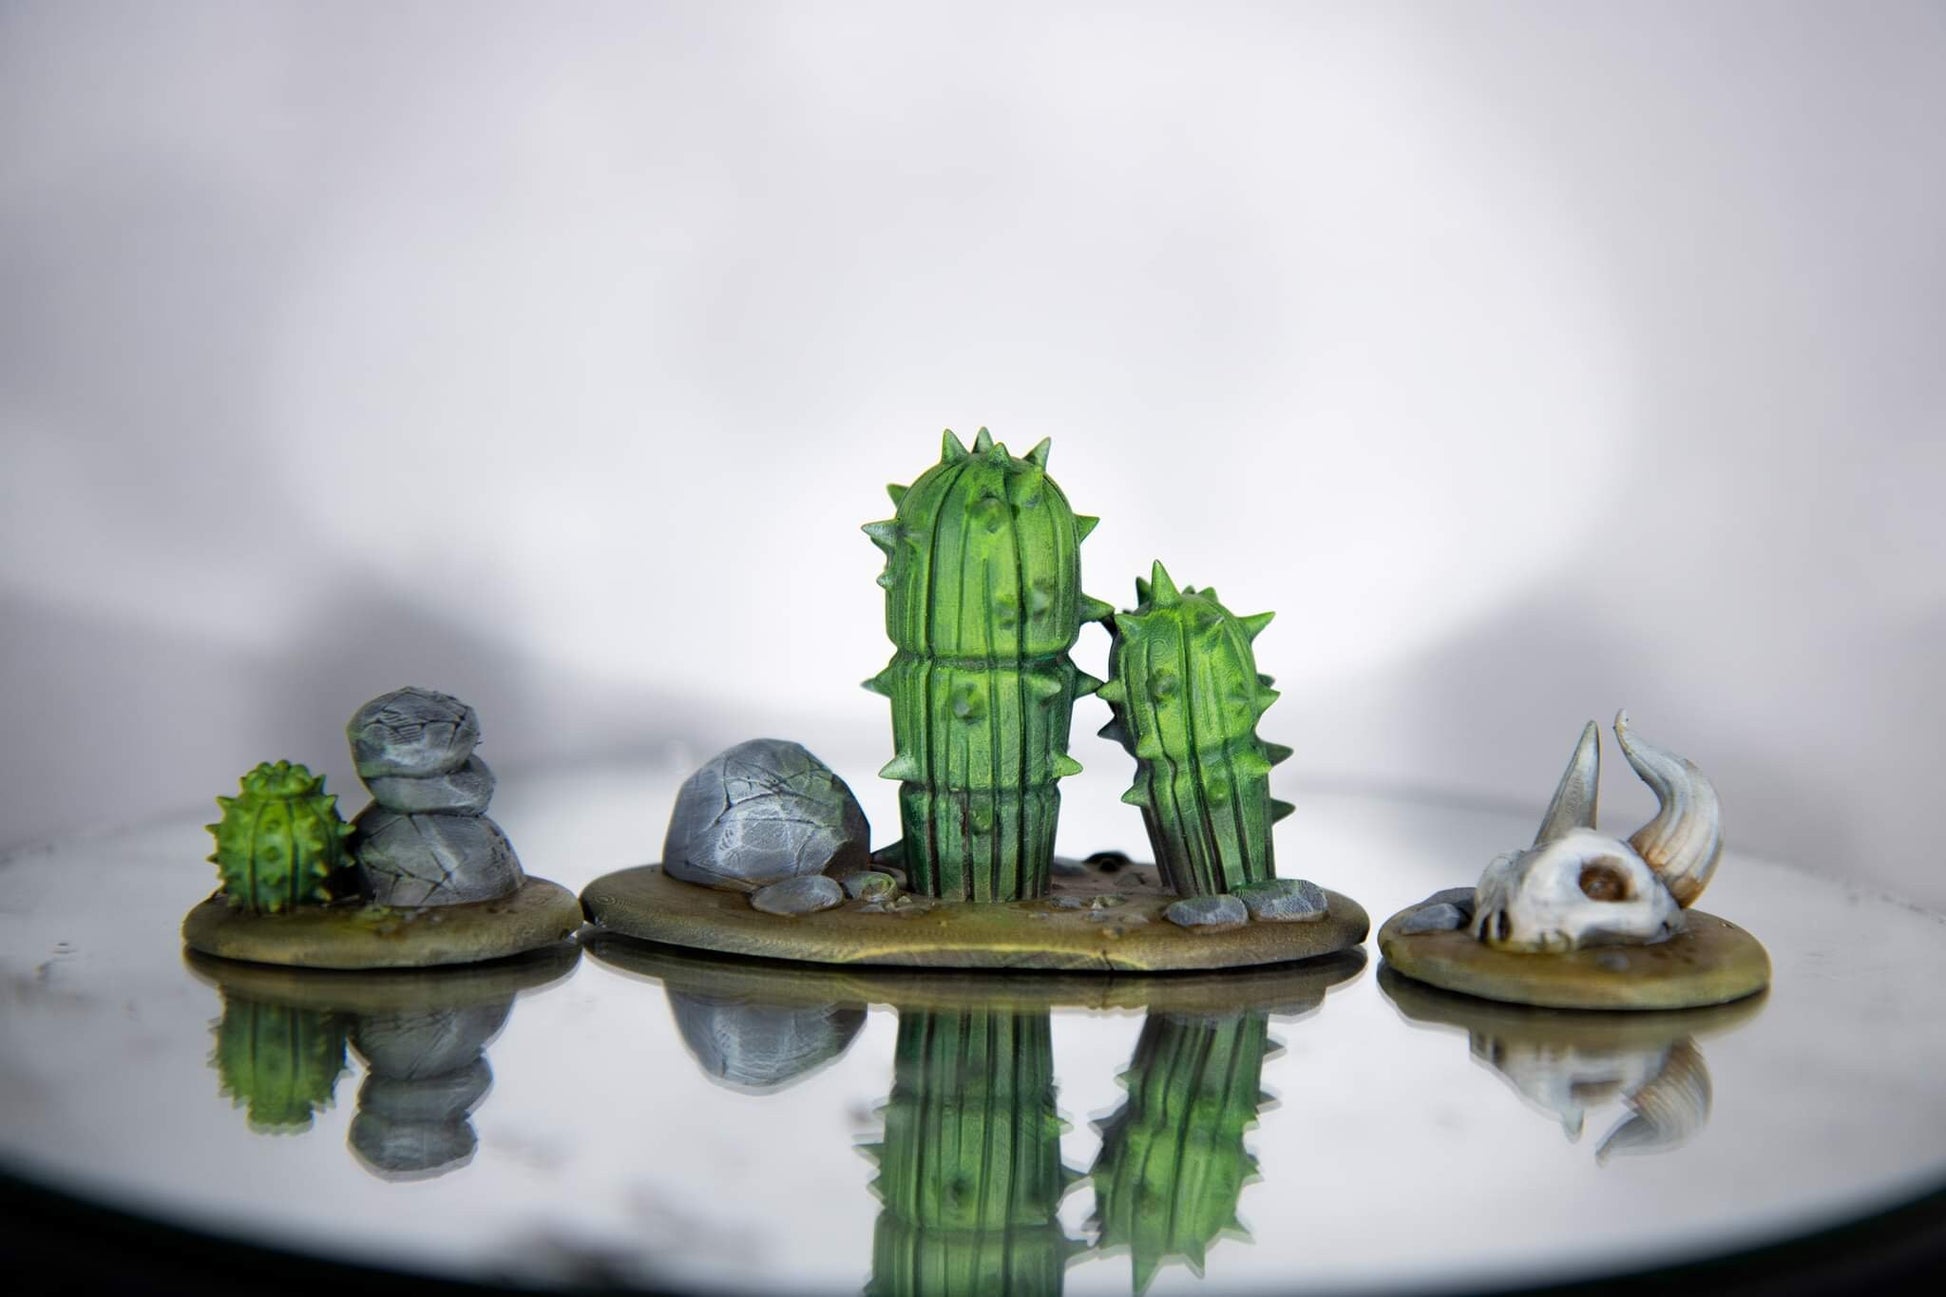 Desert Scatter Terrain Painted - 7 Dice Heads Printed Scatter Pieces | Dungeons & Dragons | Pathfinder | Tabletop